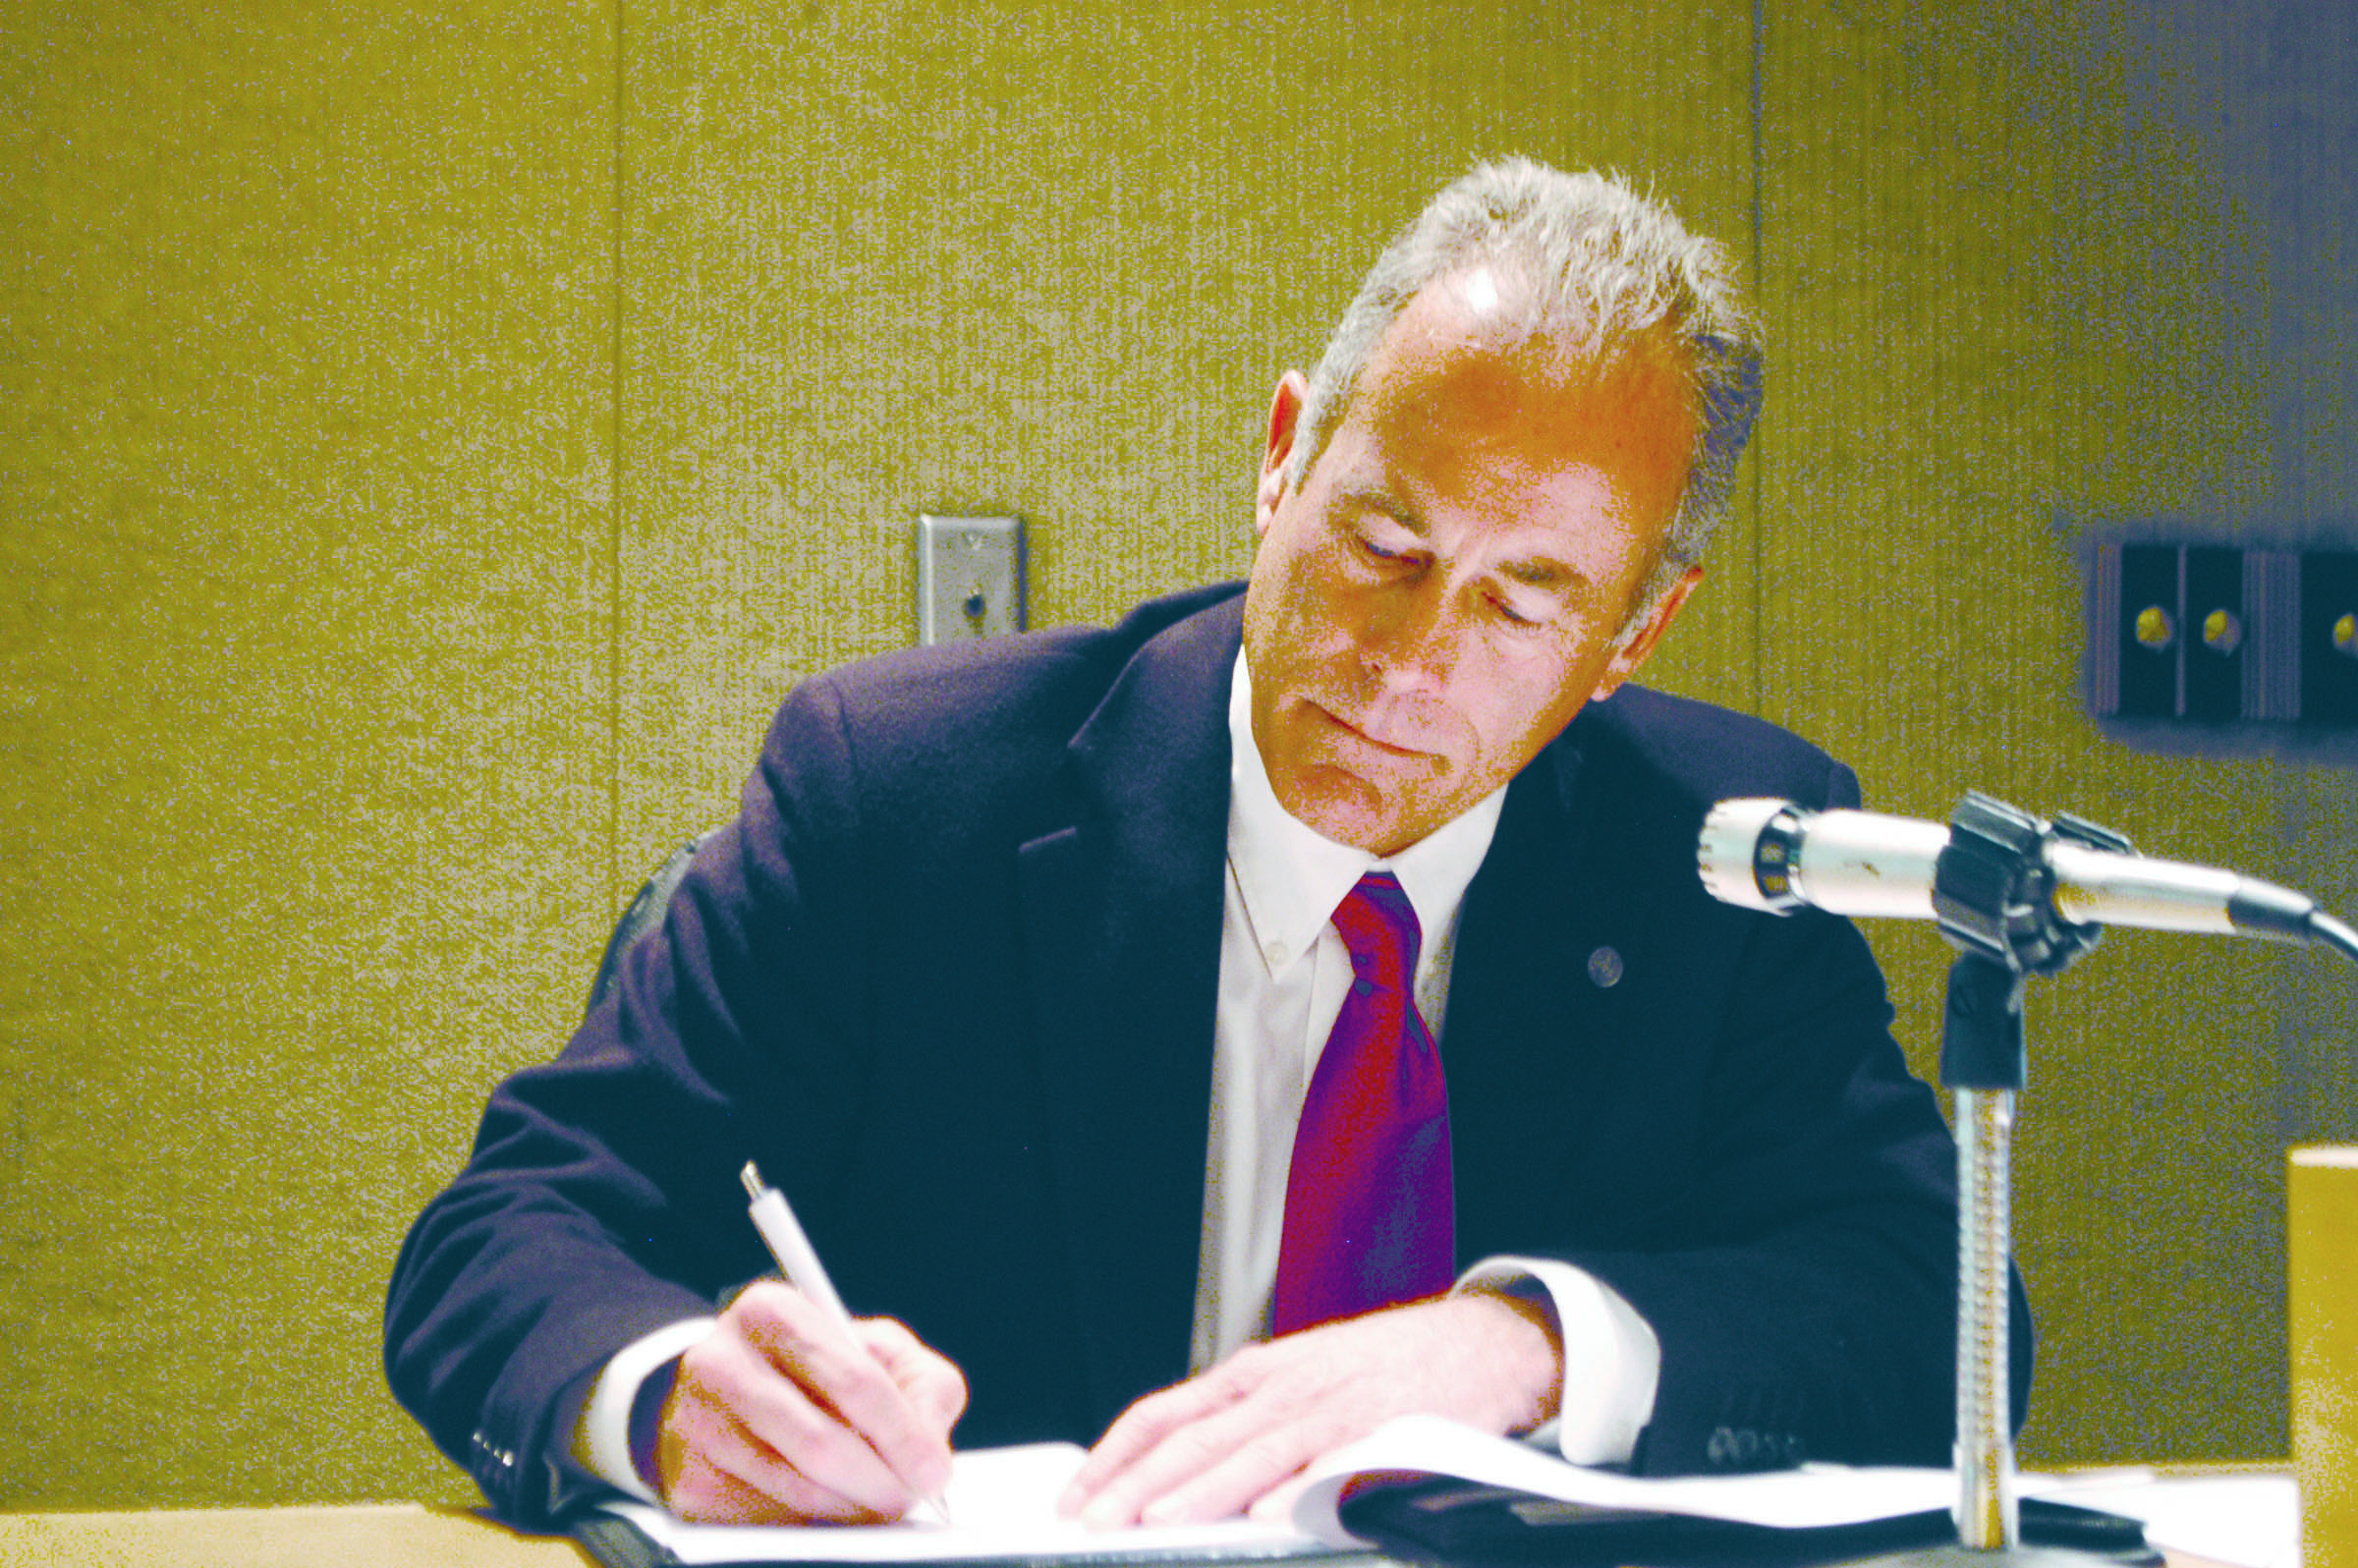 Former Port of Port Angeles Executive Director Jeff Robb signs his contract as director of environmental affairs during a port commissioners meeting last month.  -- Photo by Paul Gottlieb/Peninsula Daily News